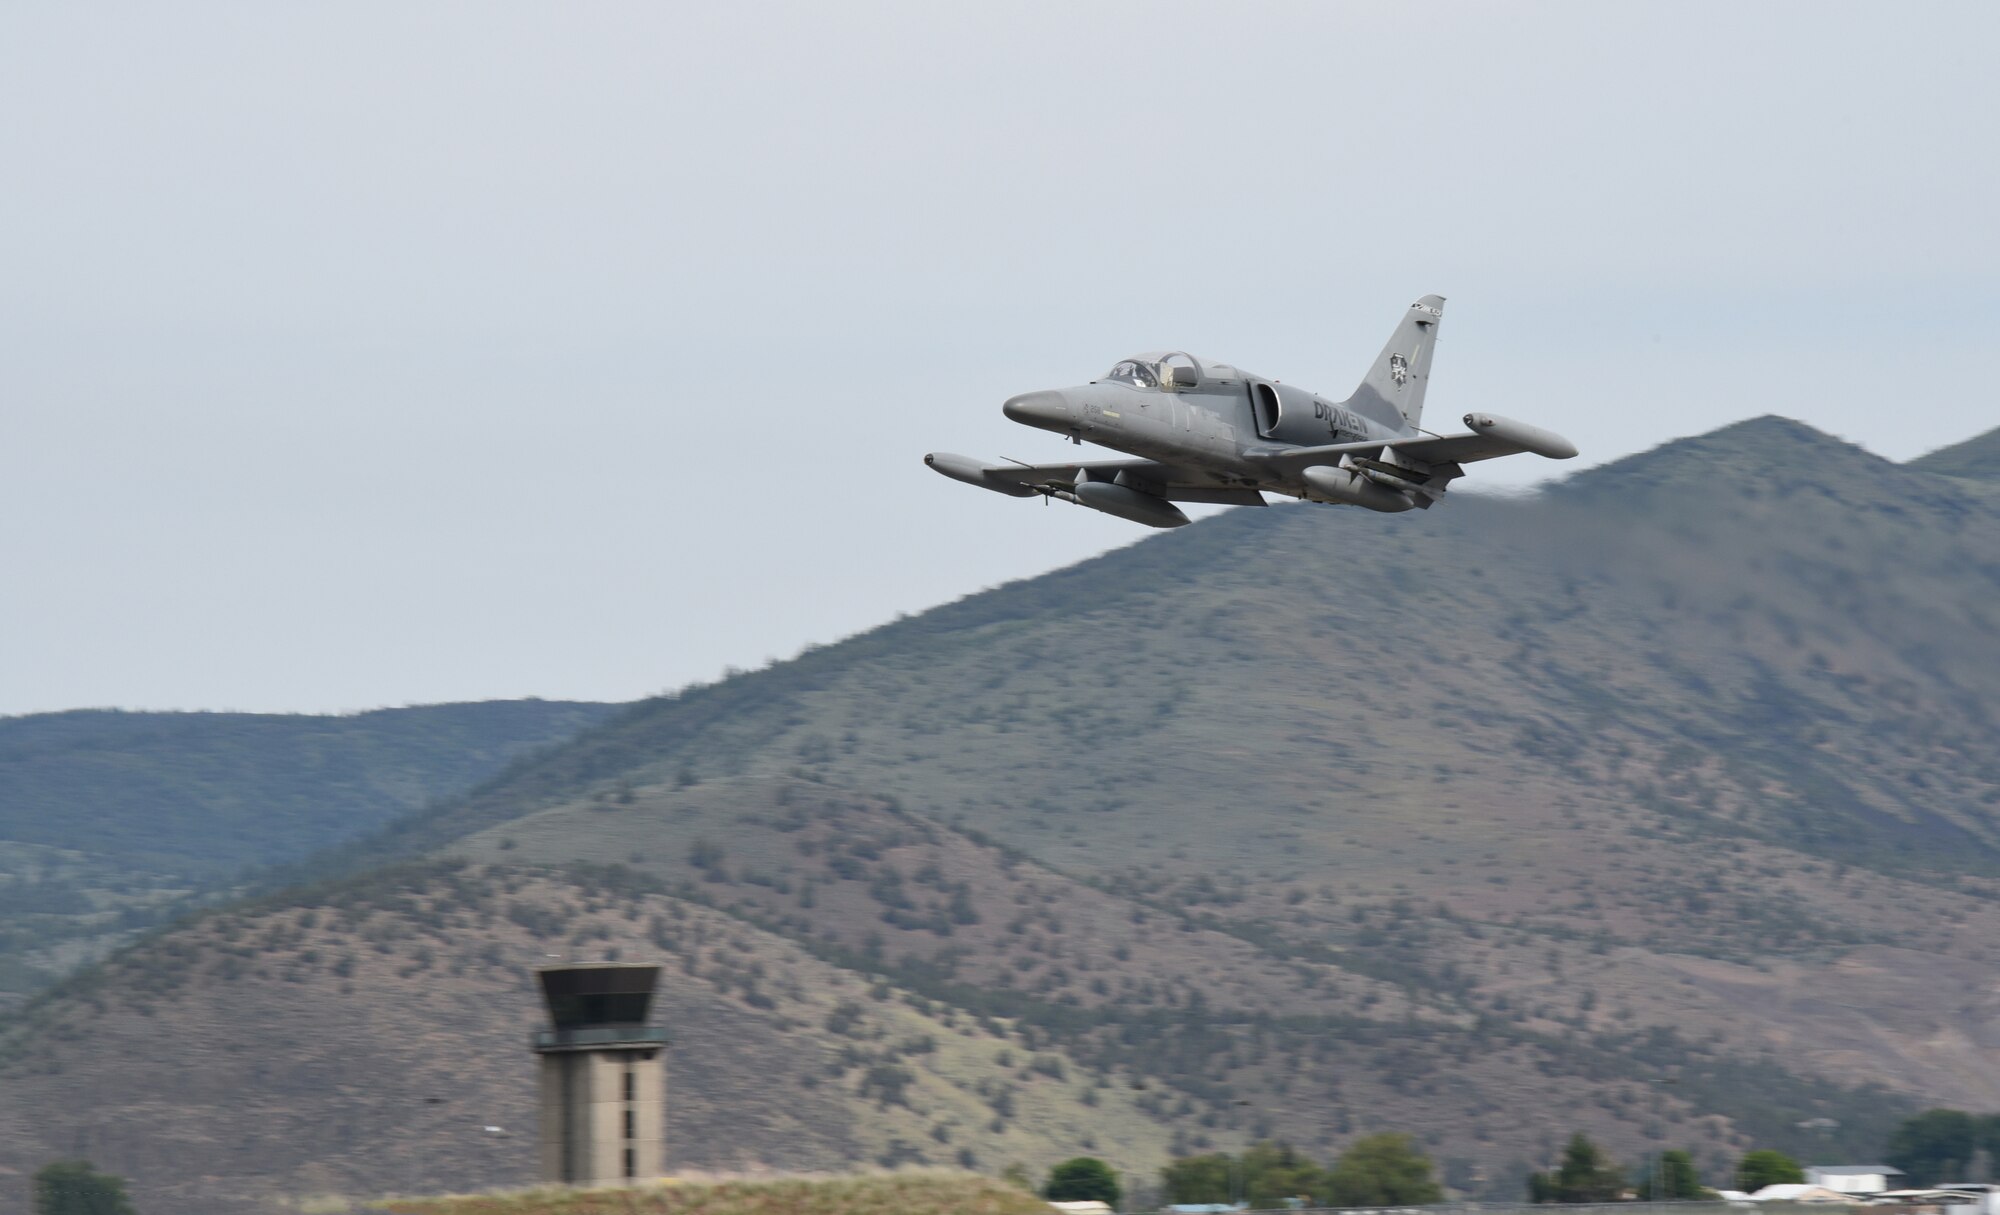 173rd FW Expands Training with Contracted Adversary Air